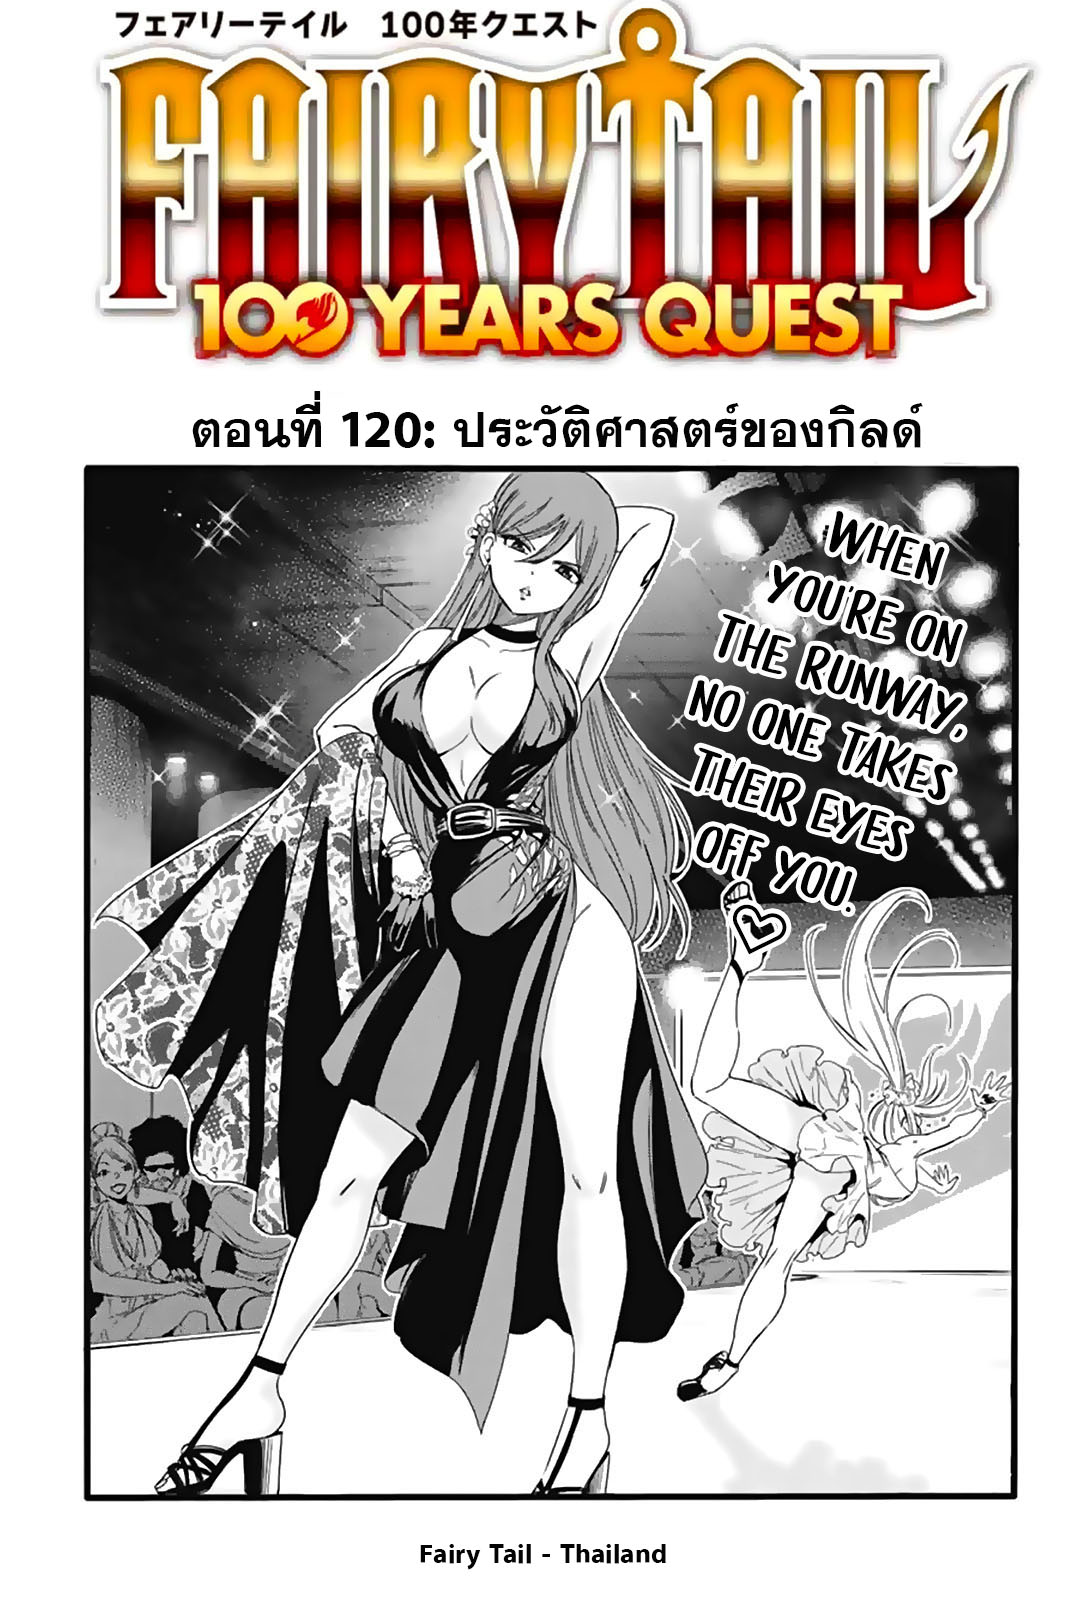 Fairy Tail 100 Years Quest 120 (1)